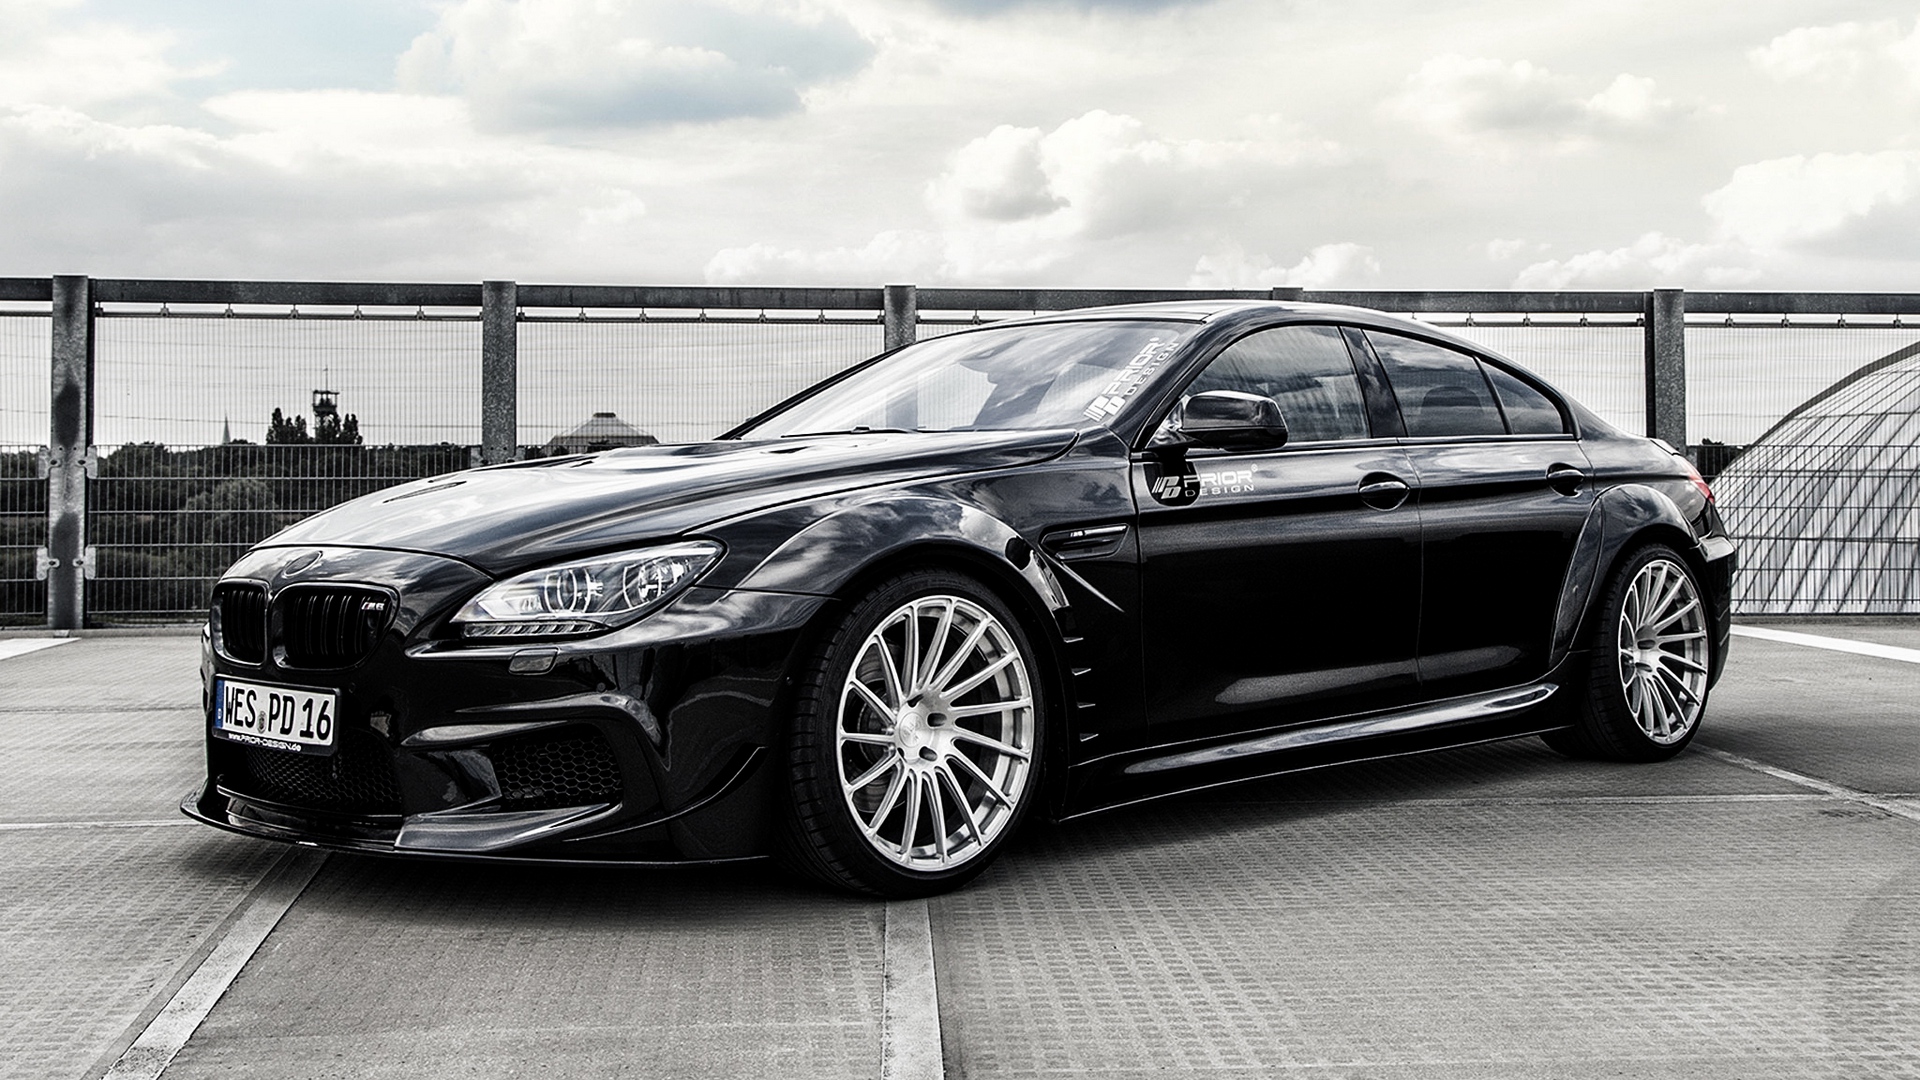 Bmw M6 Wallpapers